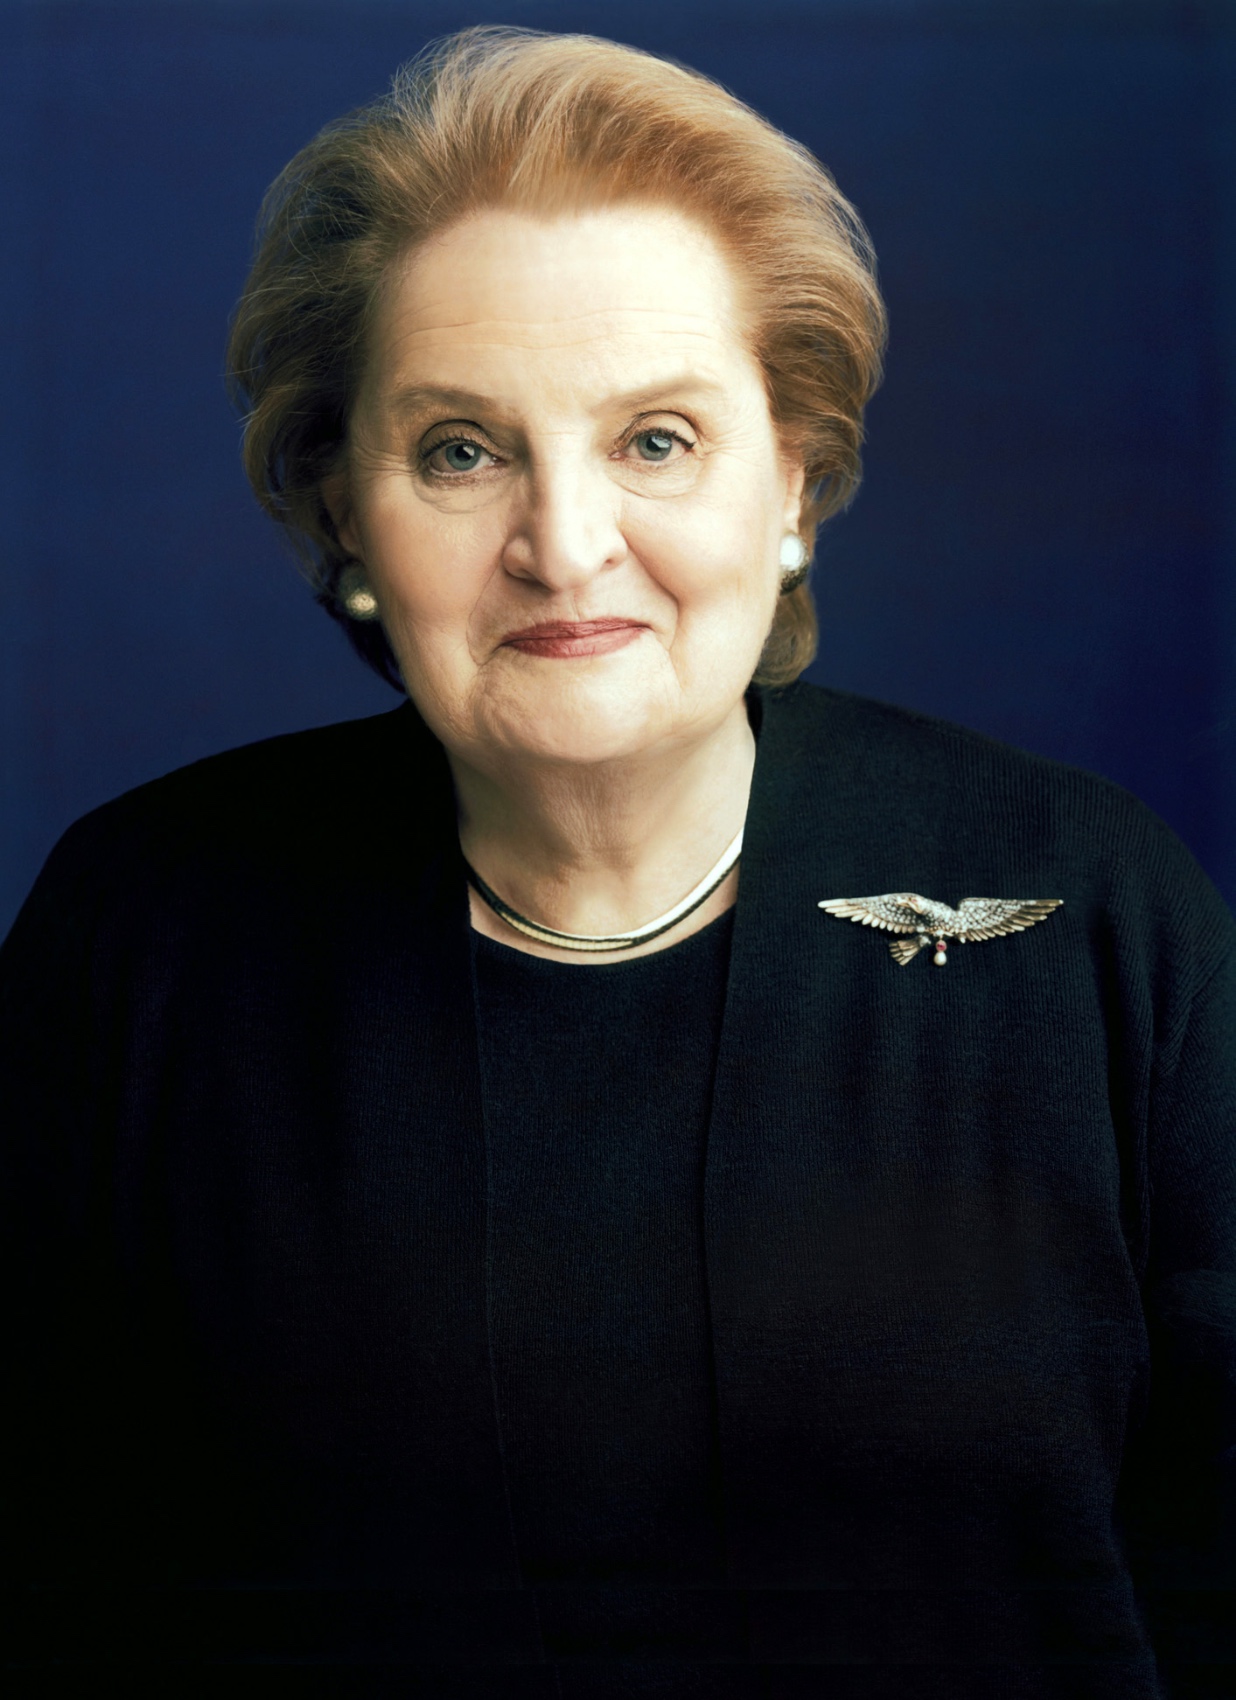 Meeting with Madeleine Albright